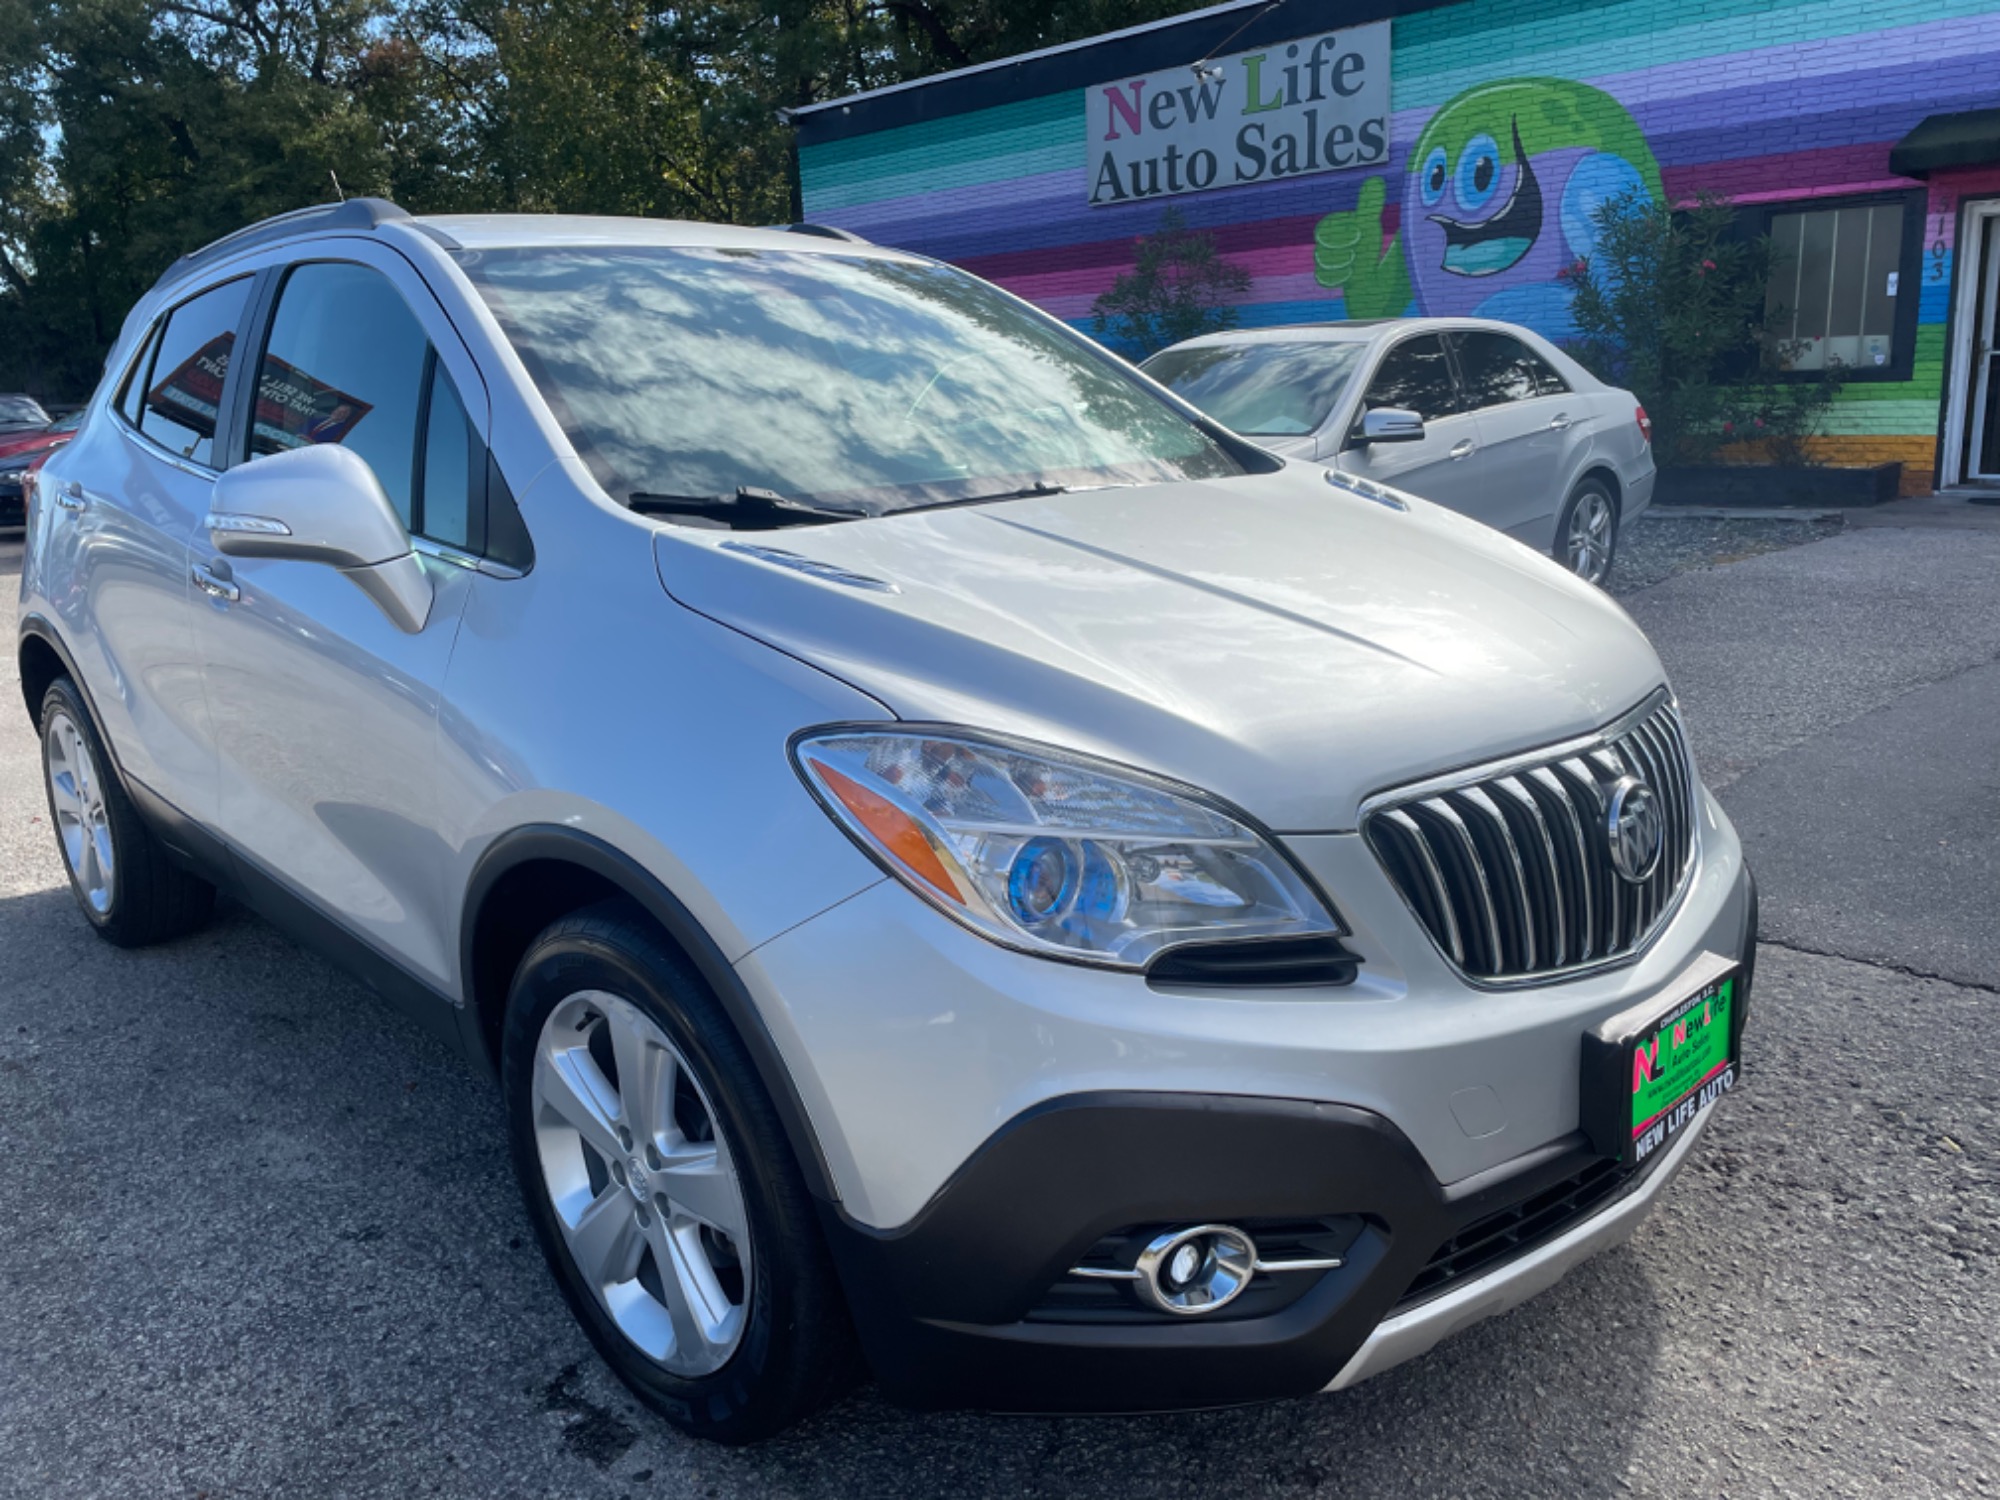 photo of 2015 BUICK ENCORE LEATHER - Super clean and well maintained!!! A GREAT Drive!!